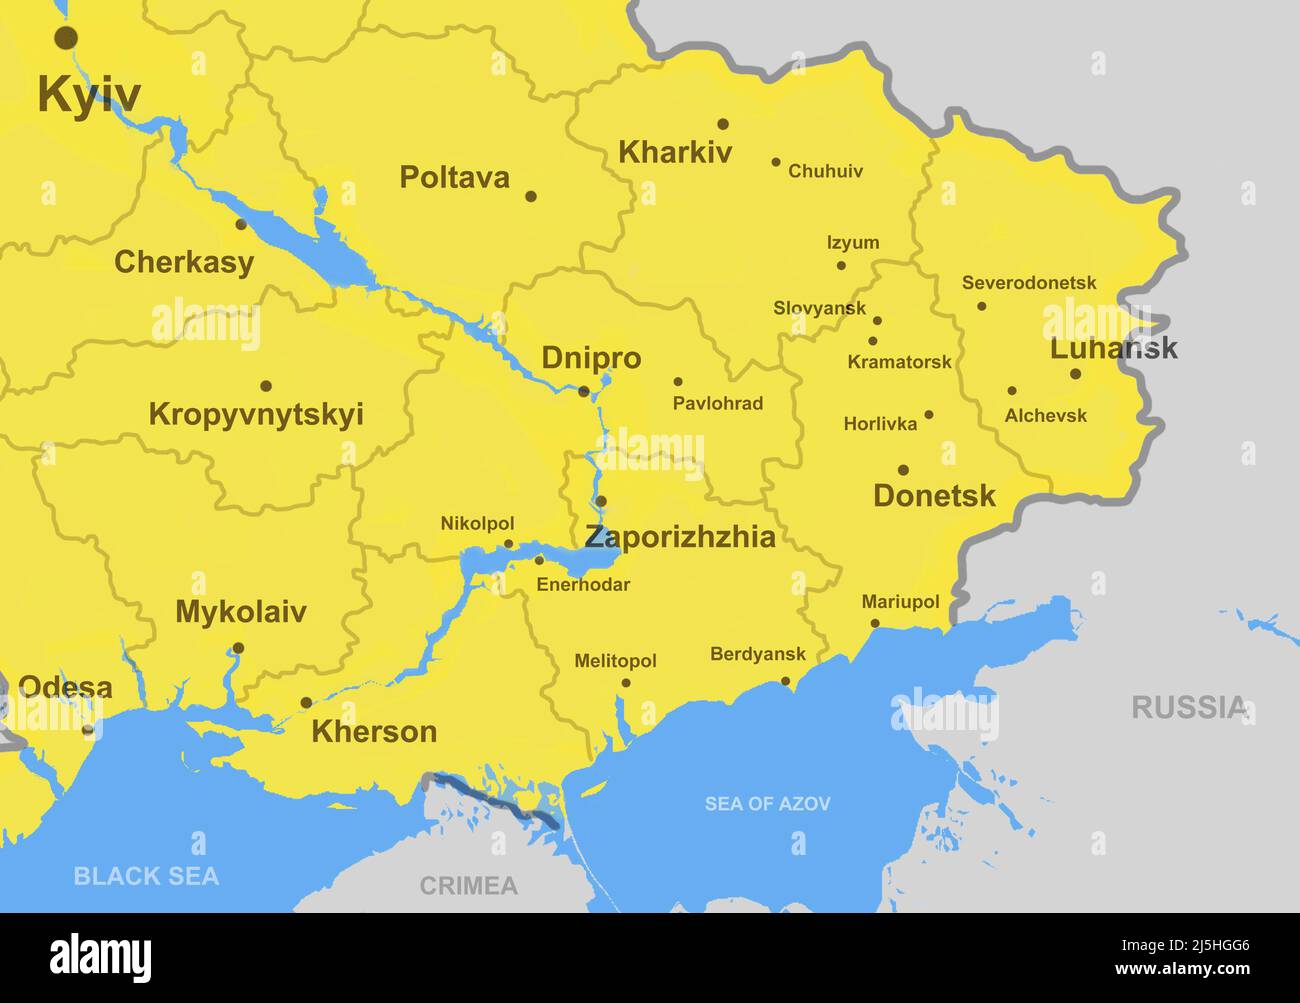 Map of Southeast of Ukraine with Donbas region, cities and borders. Luhansk, Donetsk and Mariupol on outline map with Crimea, Black and Azov seas. Con Stock Photo